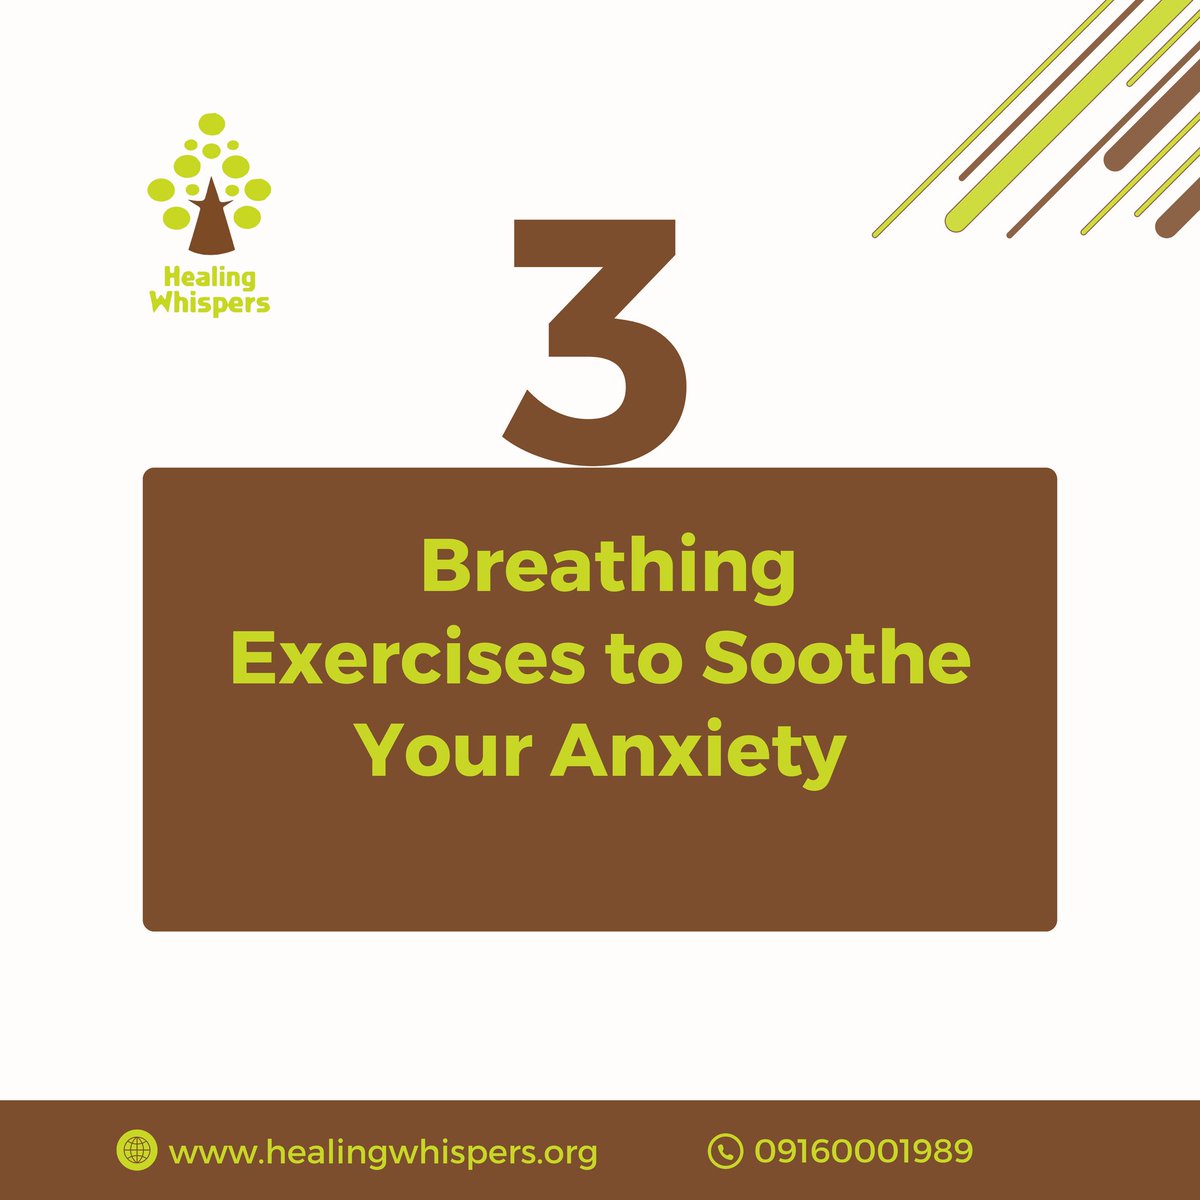 These exercises are simple tools you can turn to whenever anxiety arises. 
Take a few moments for yourself, connect with your breath, and let these techniques soothe your mind.

#anxiety #breathingtechniques